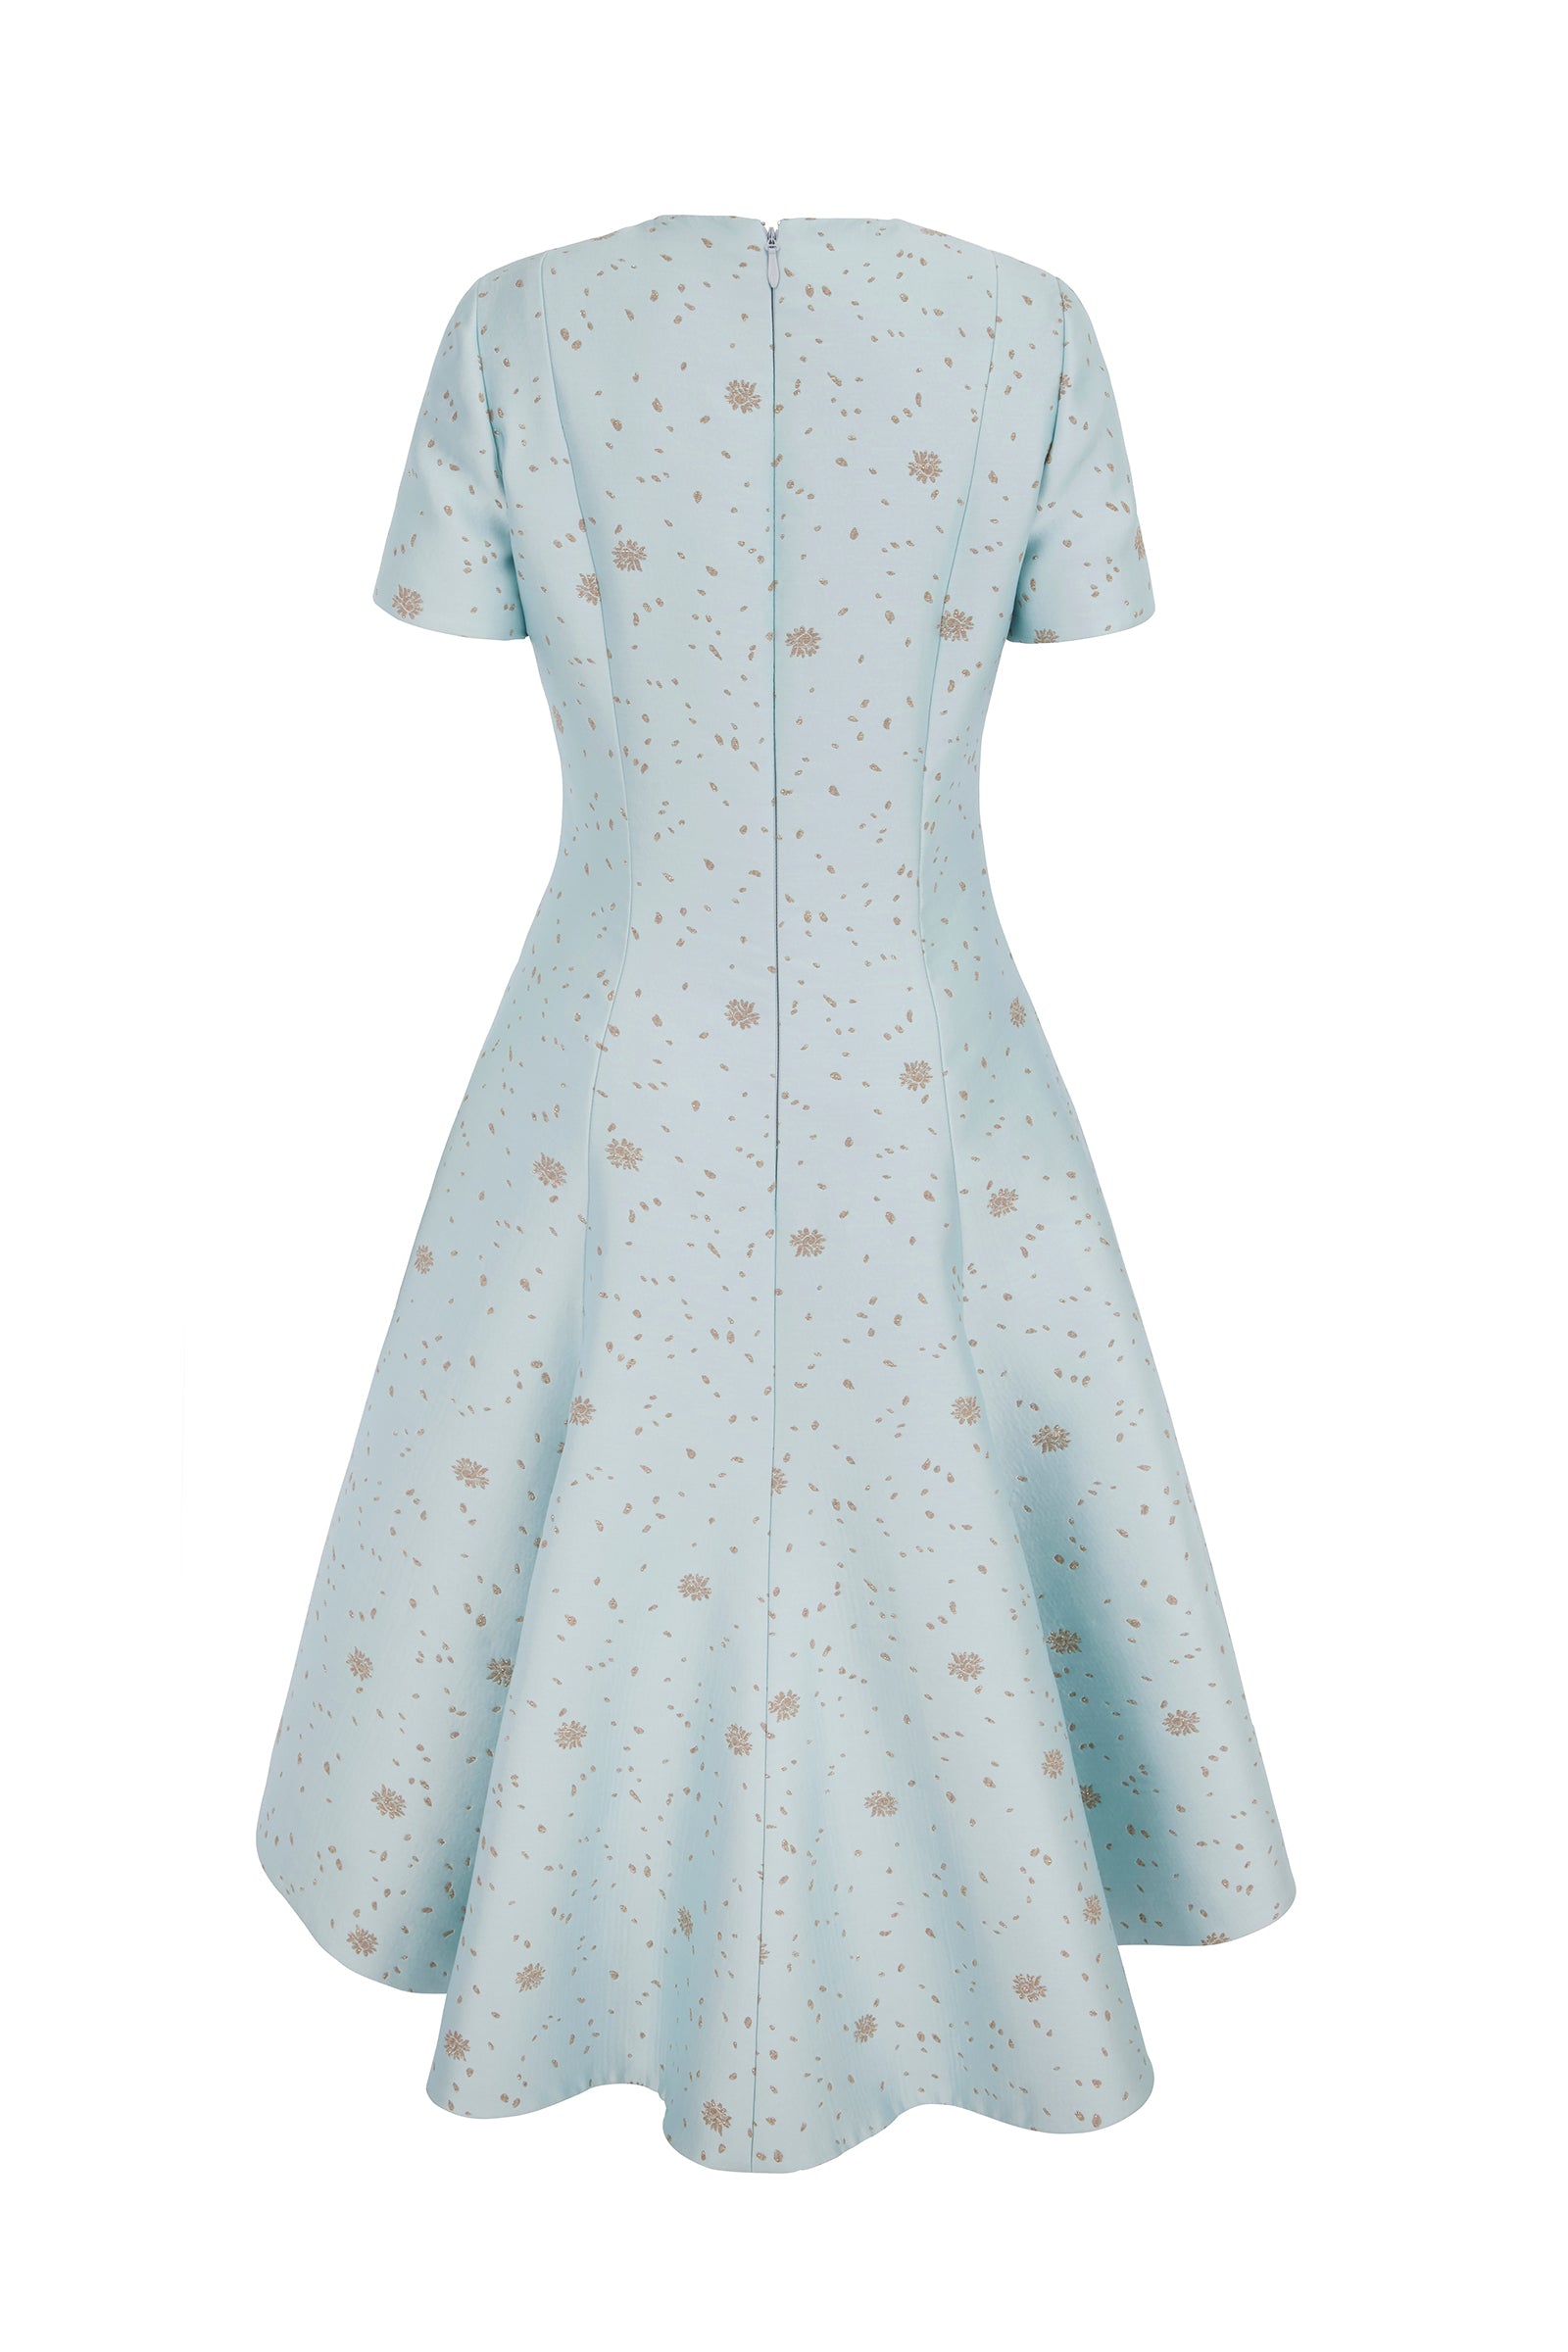 Cape and Showstopper Outfit Petal Jacquard Blue | Suzannah London ...